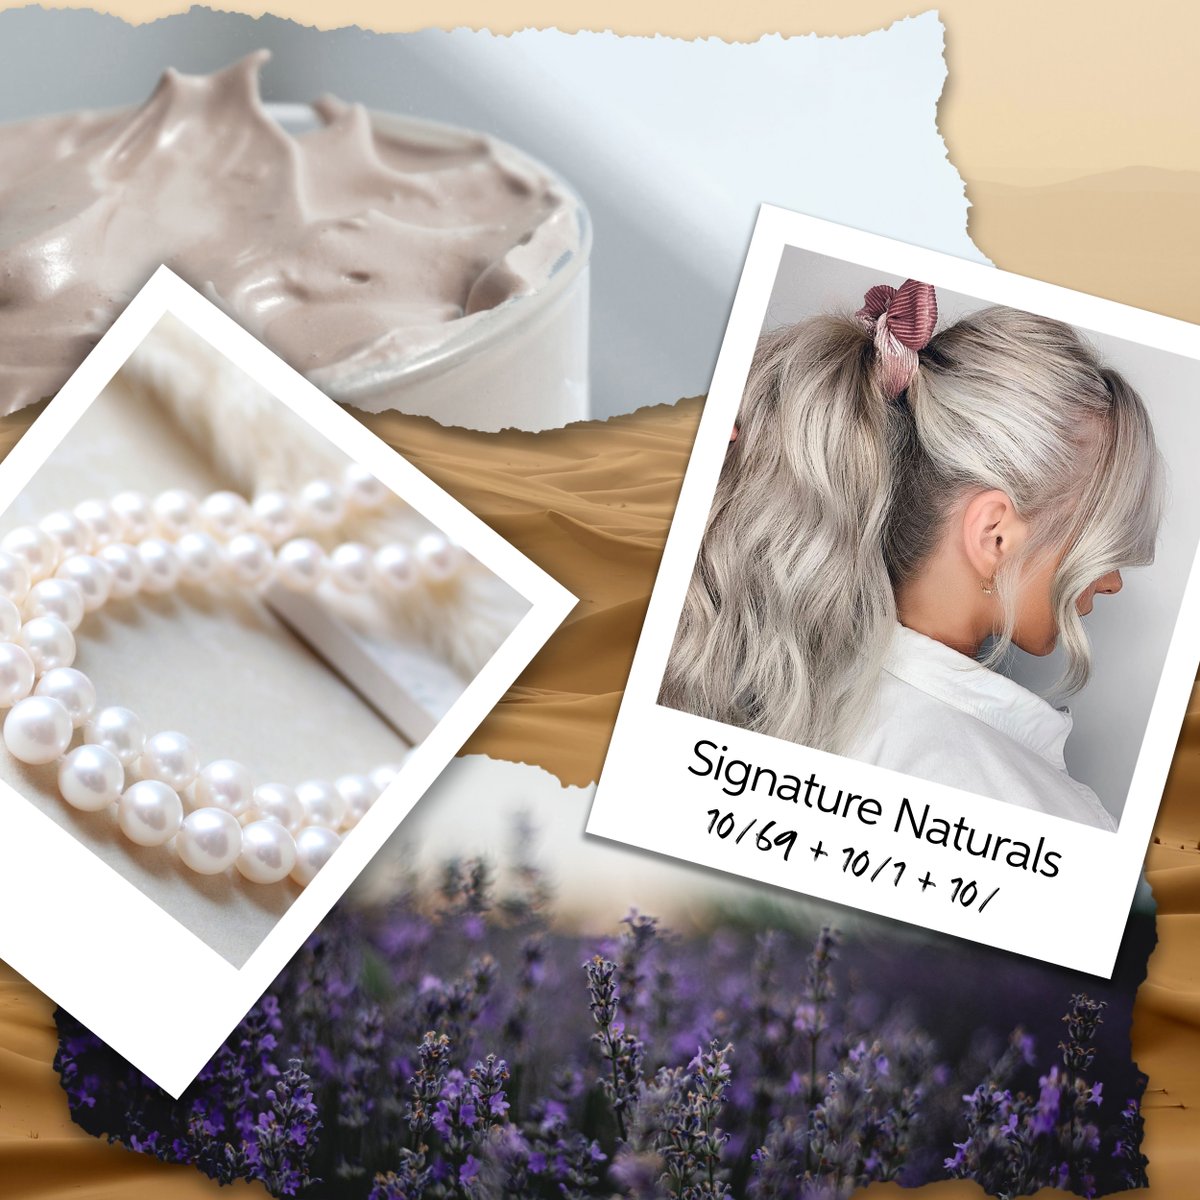 Embrace your clients’ natural beauty this season with this pearly blonde #SignatureNaturals formula by the brilliant Eric Medz 🤩 #BlondeHair Head to our latest trend hub to discover our secrets for creating natural, healthy-looking #WellaColor ✨👇 bit.ly/3WFY0gX